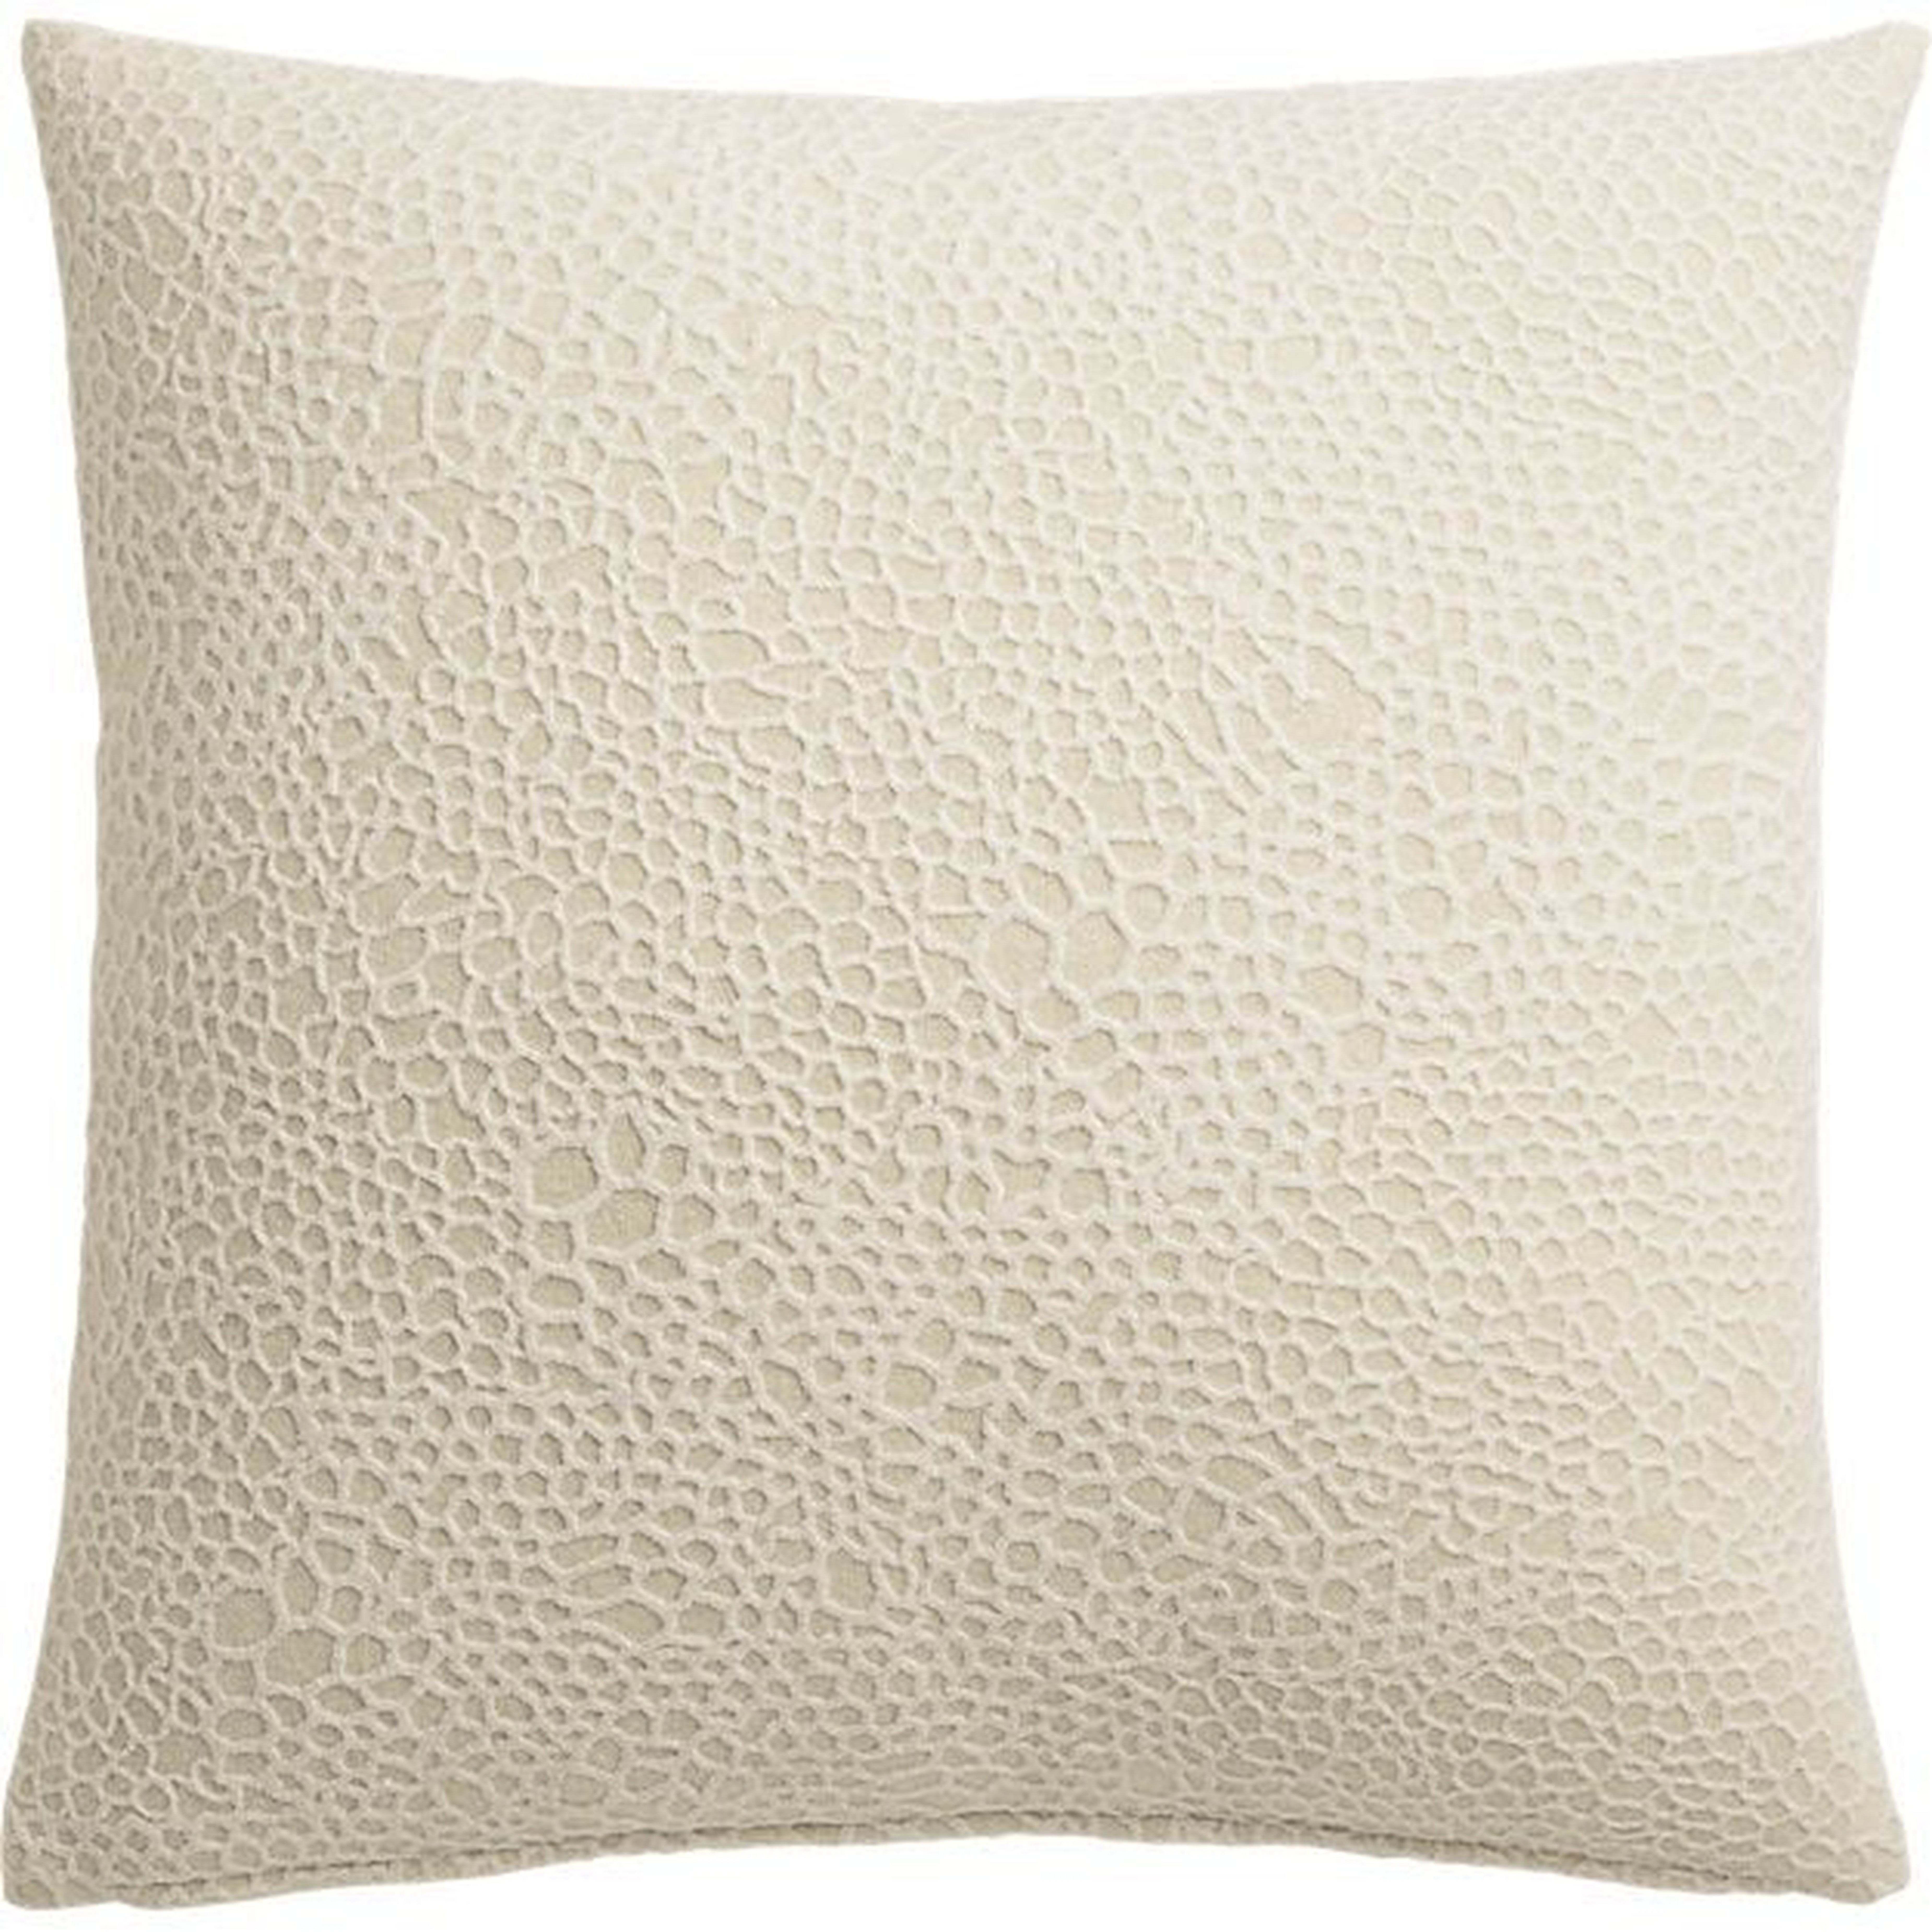 18" scatter white textured pillow with feather down insert - CB2